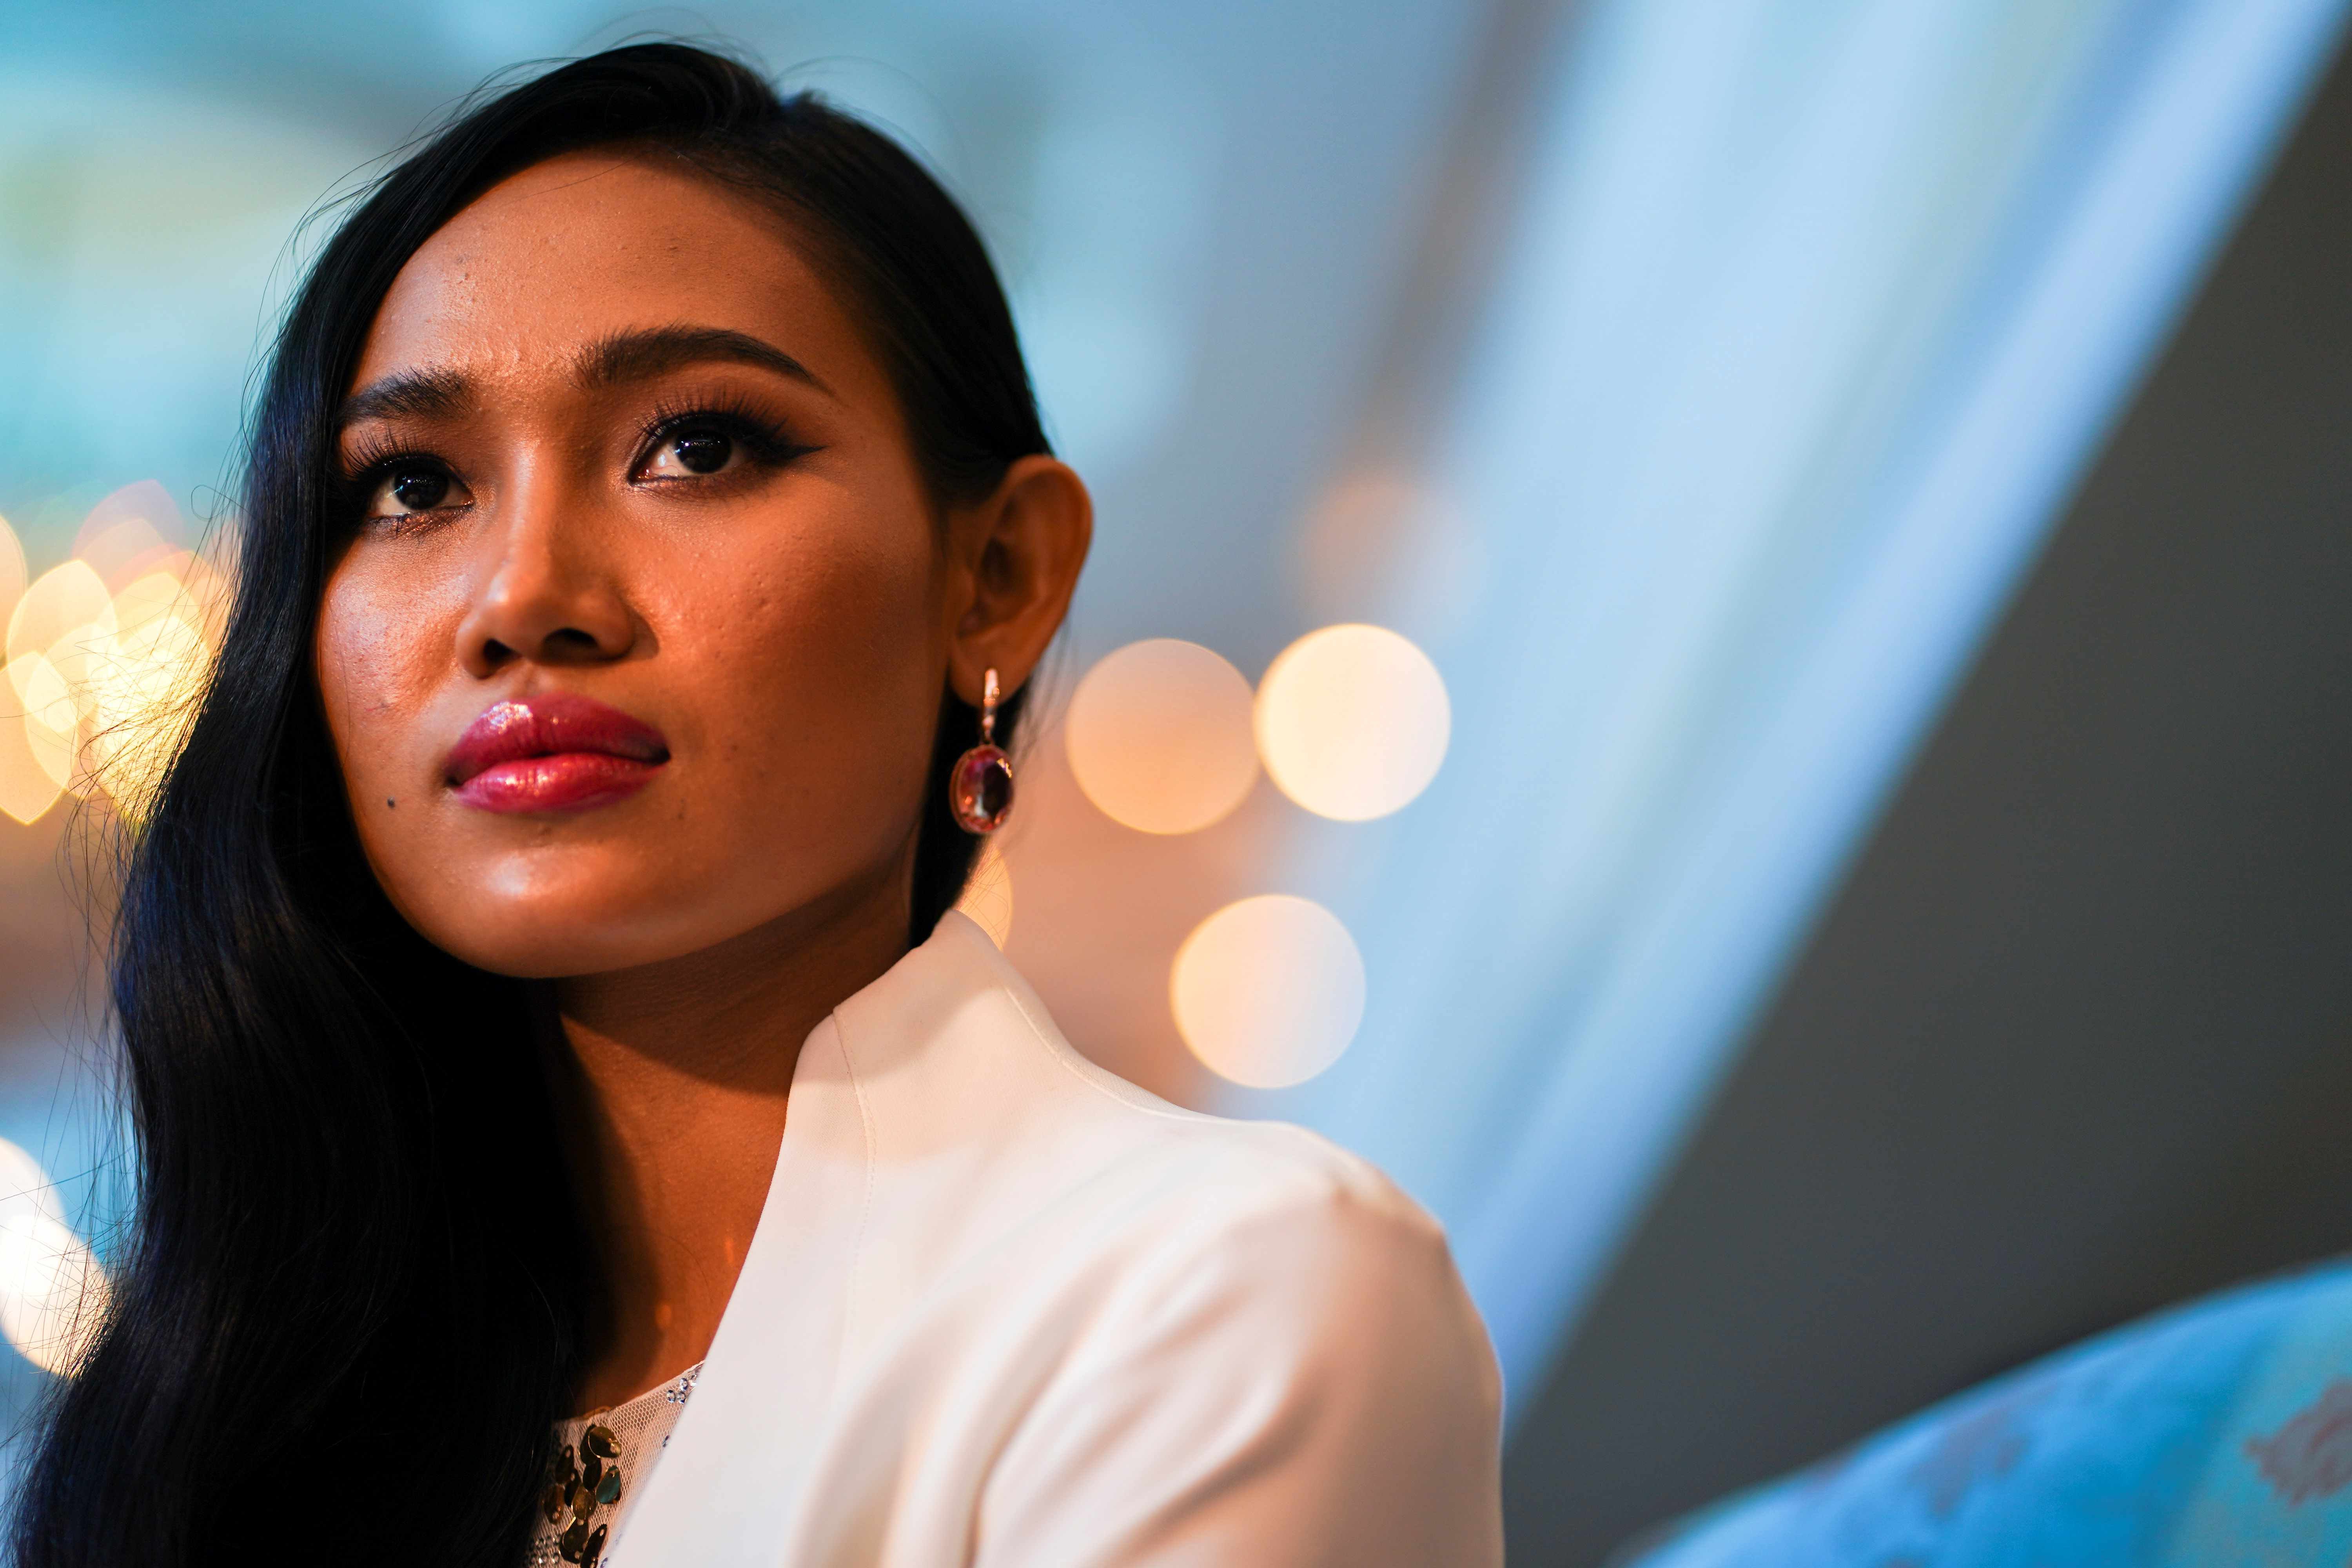 Beauty queen Han Lay takes Myanmar’s democratic fight to international stage